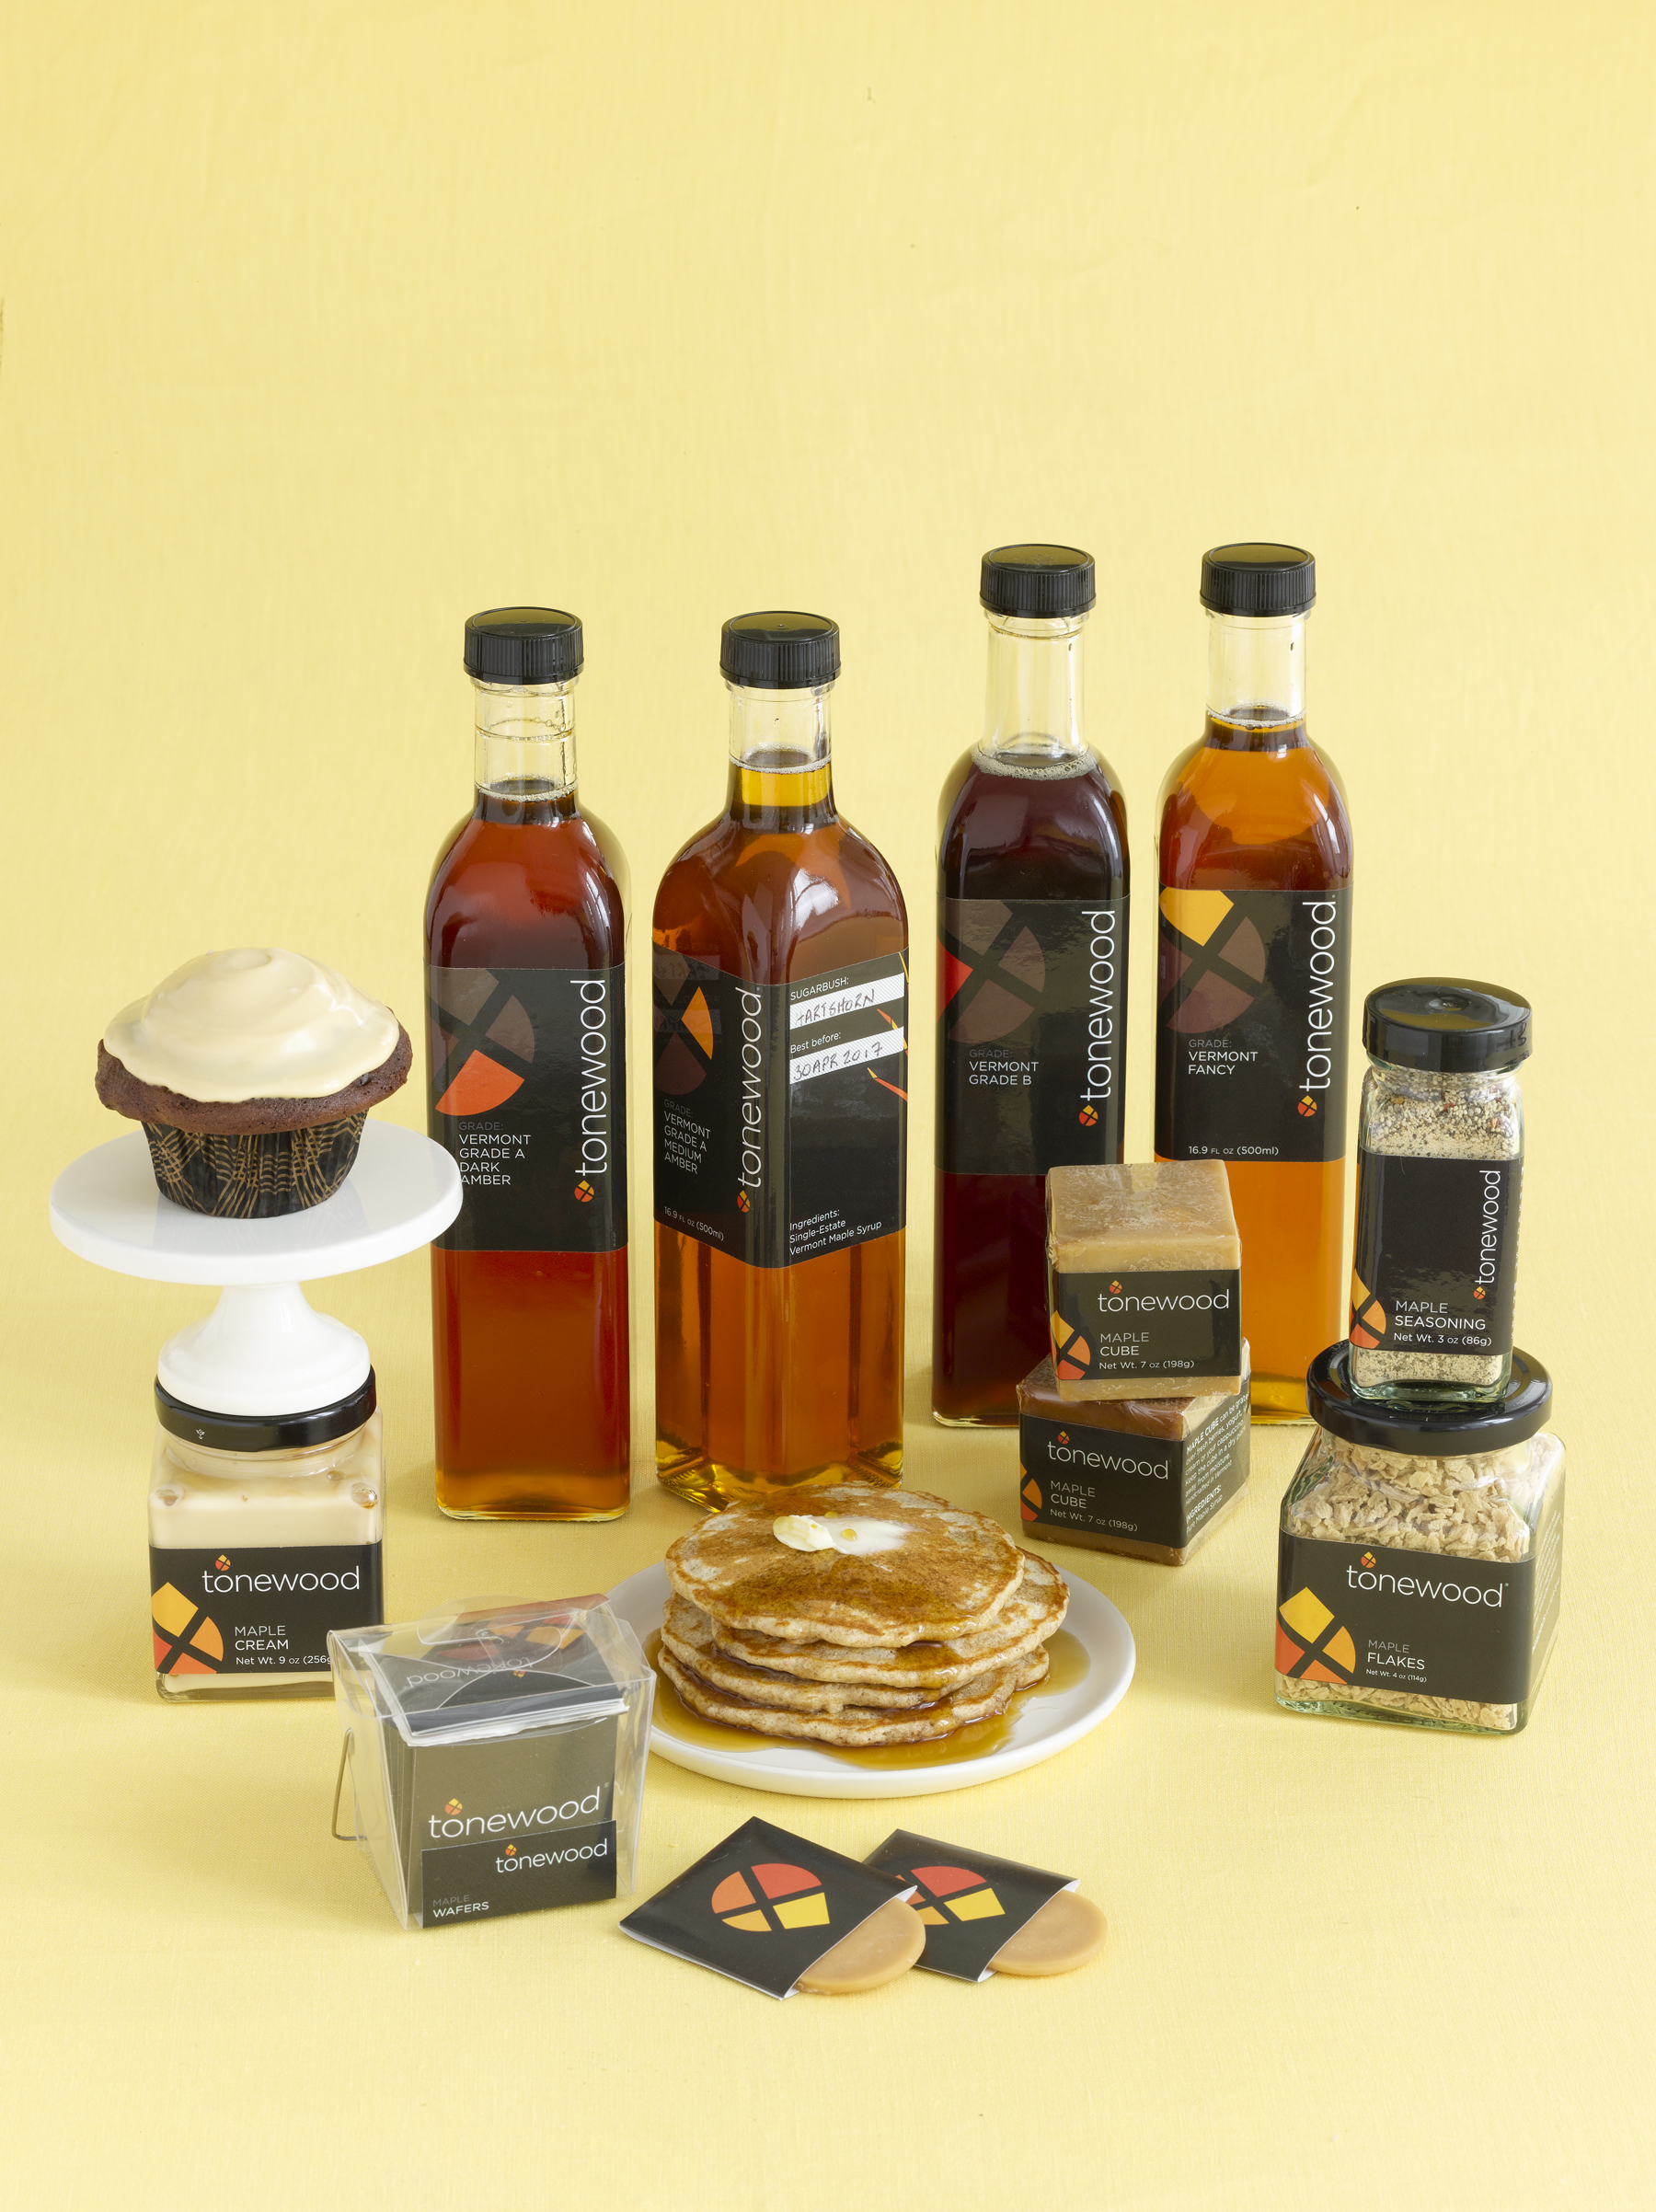 Tonewood Maple Artisan Maple Products Win Sofi Gold Award for Best Product Line